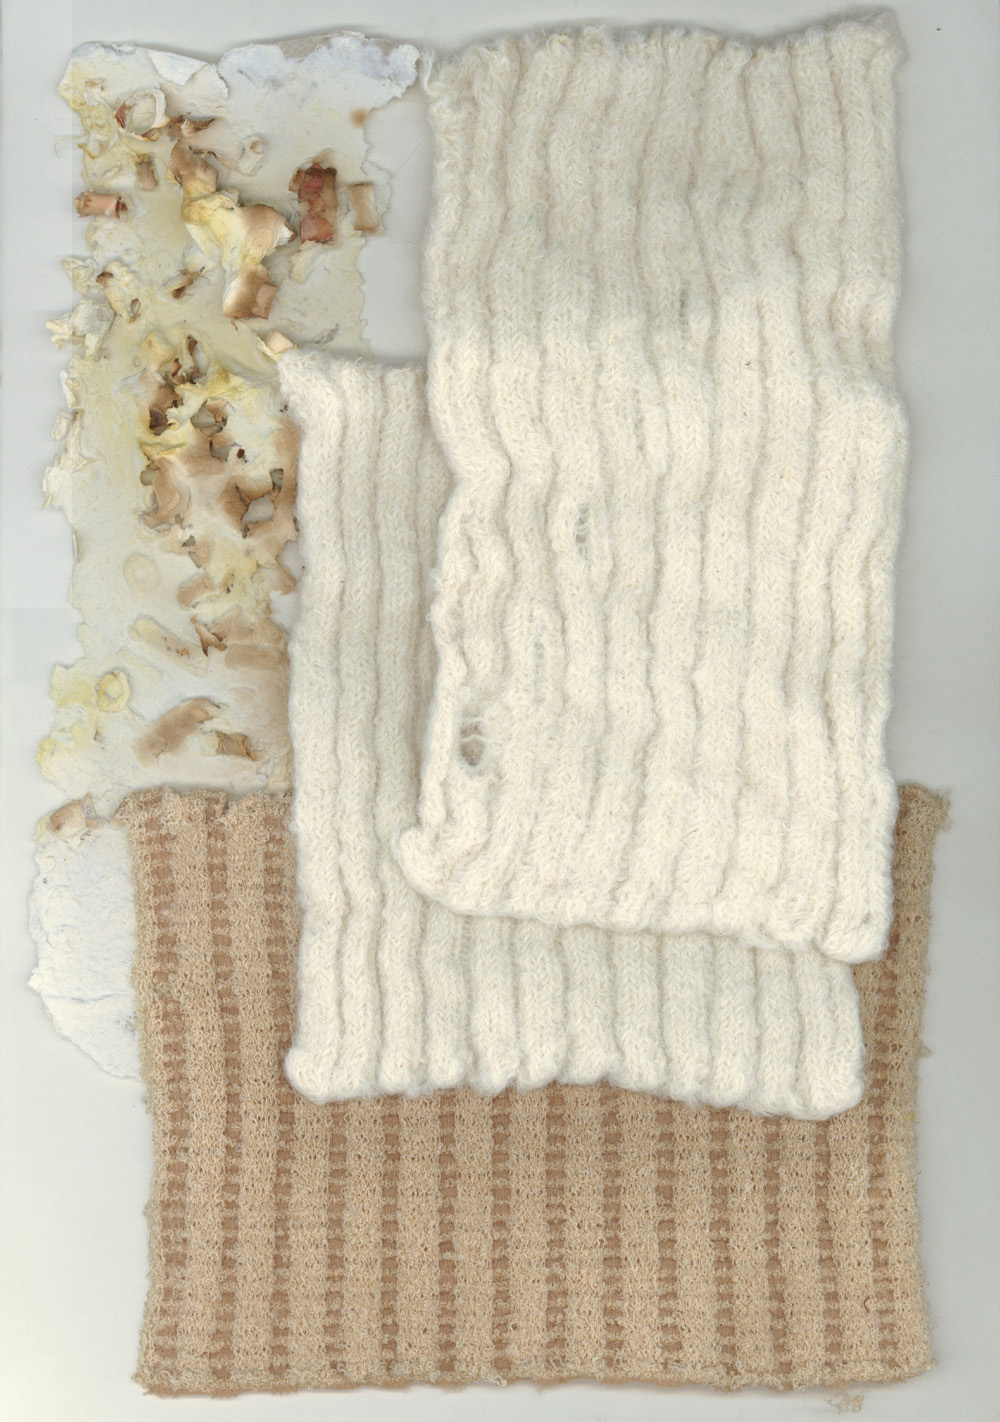 Felted white wool the cashmere designer